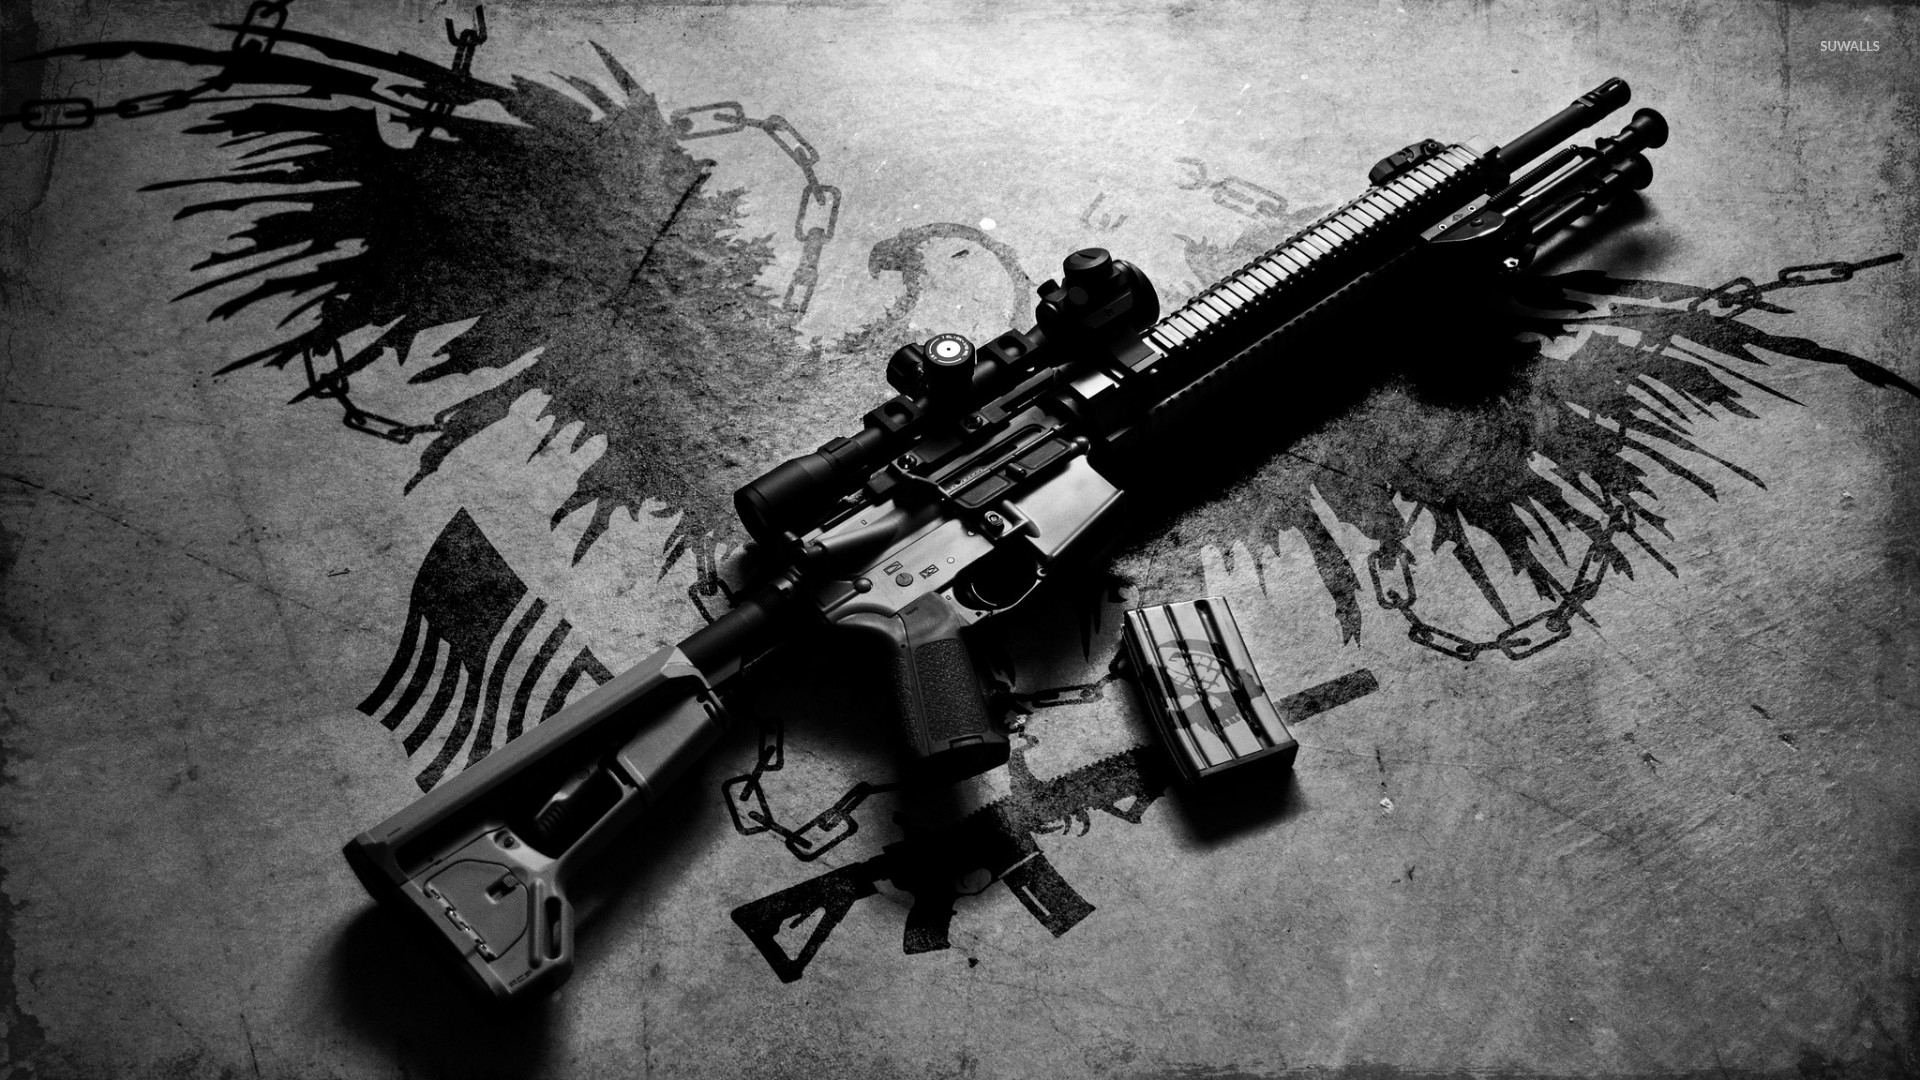 Ar 15 Rifle On The Ground Wallpaper Photography HD Wallpapers Download Free Images Wallpaper [wallpaper981.blogspot.com]